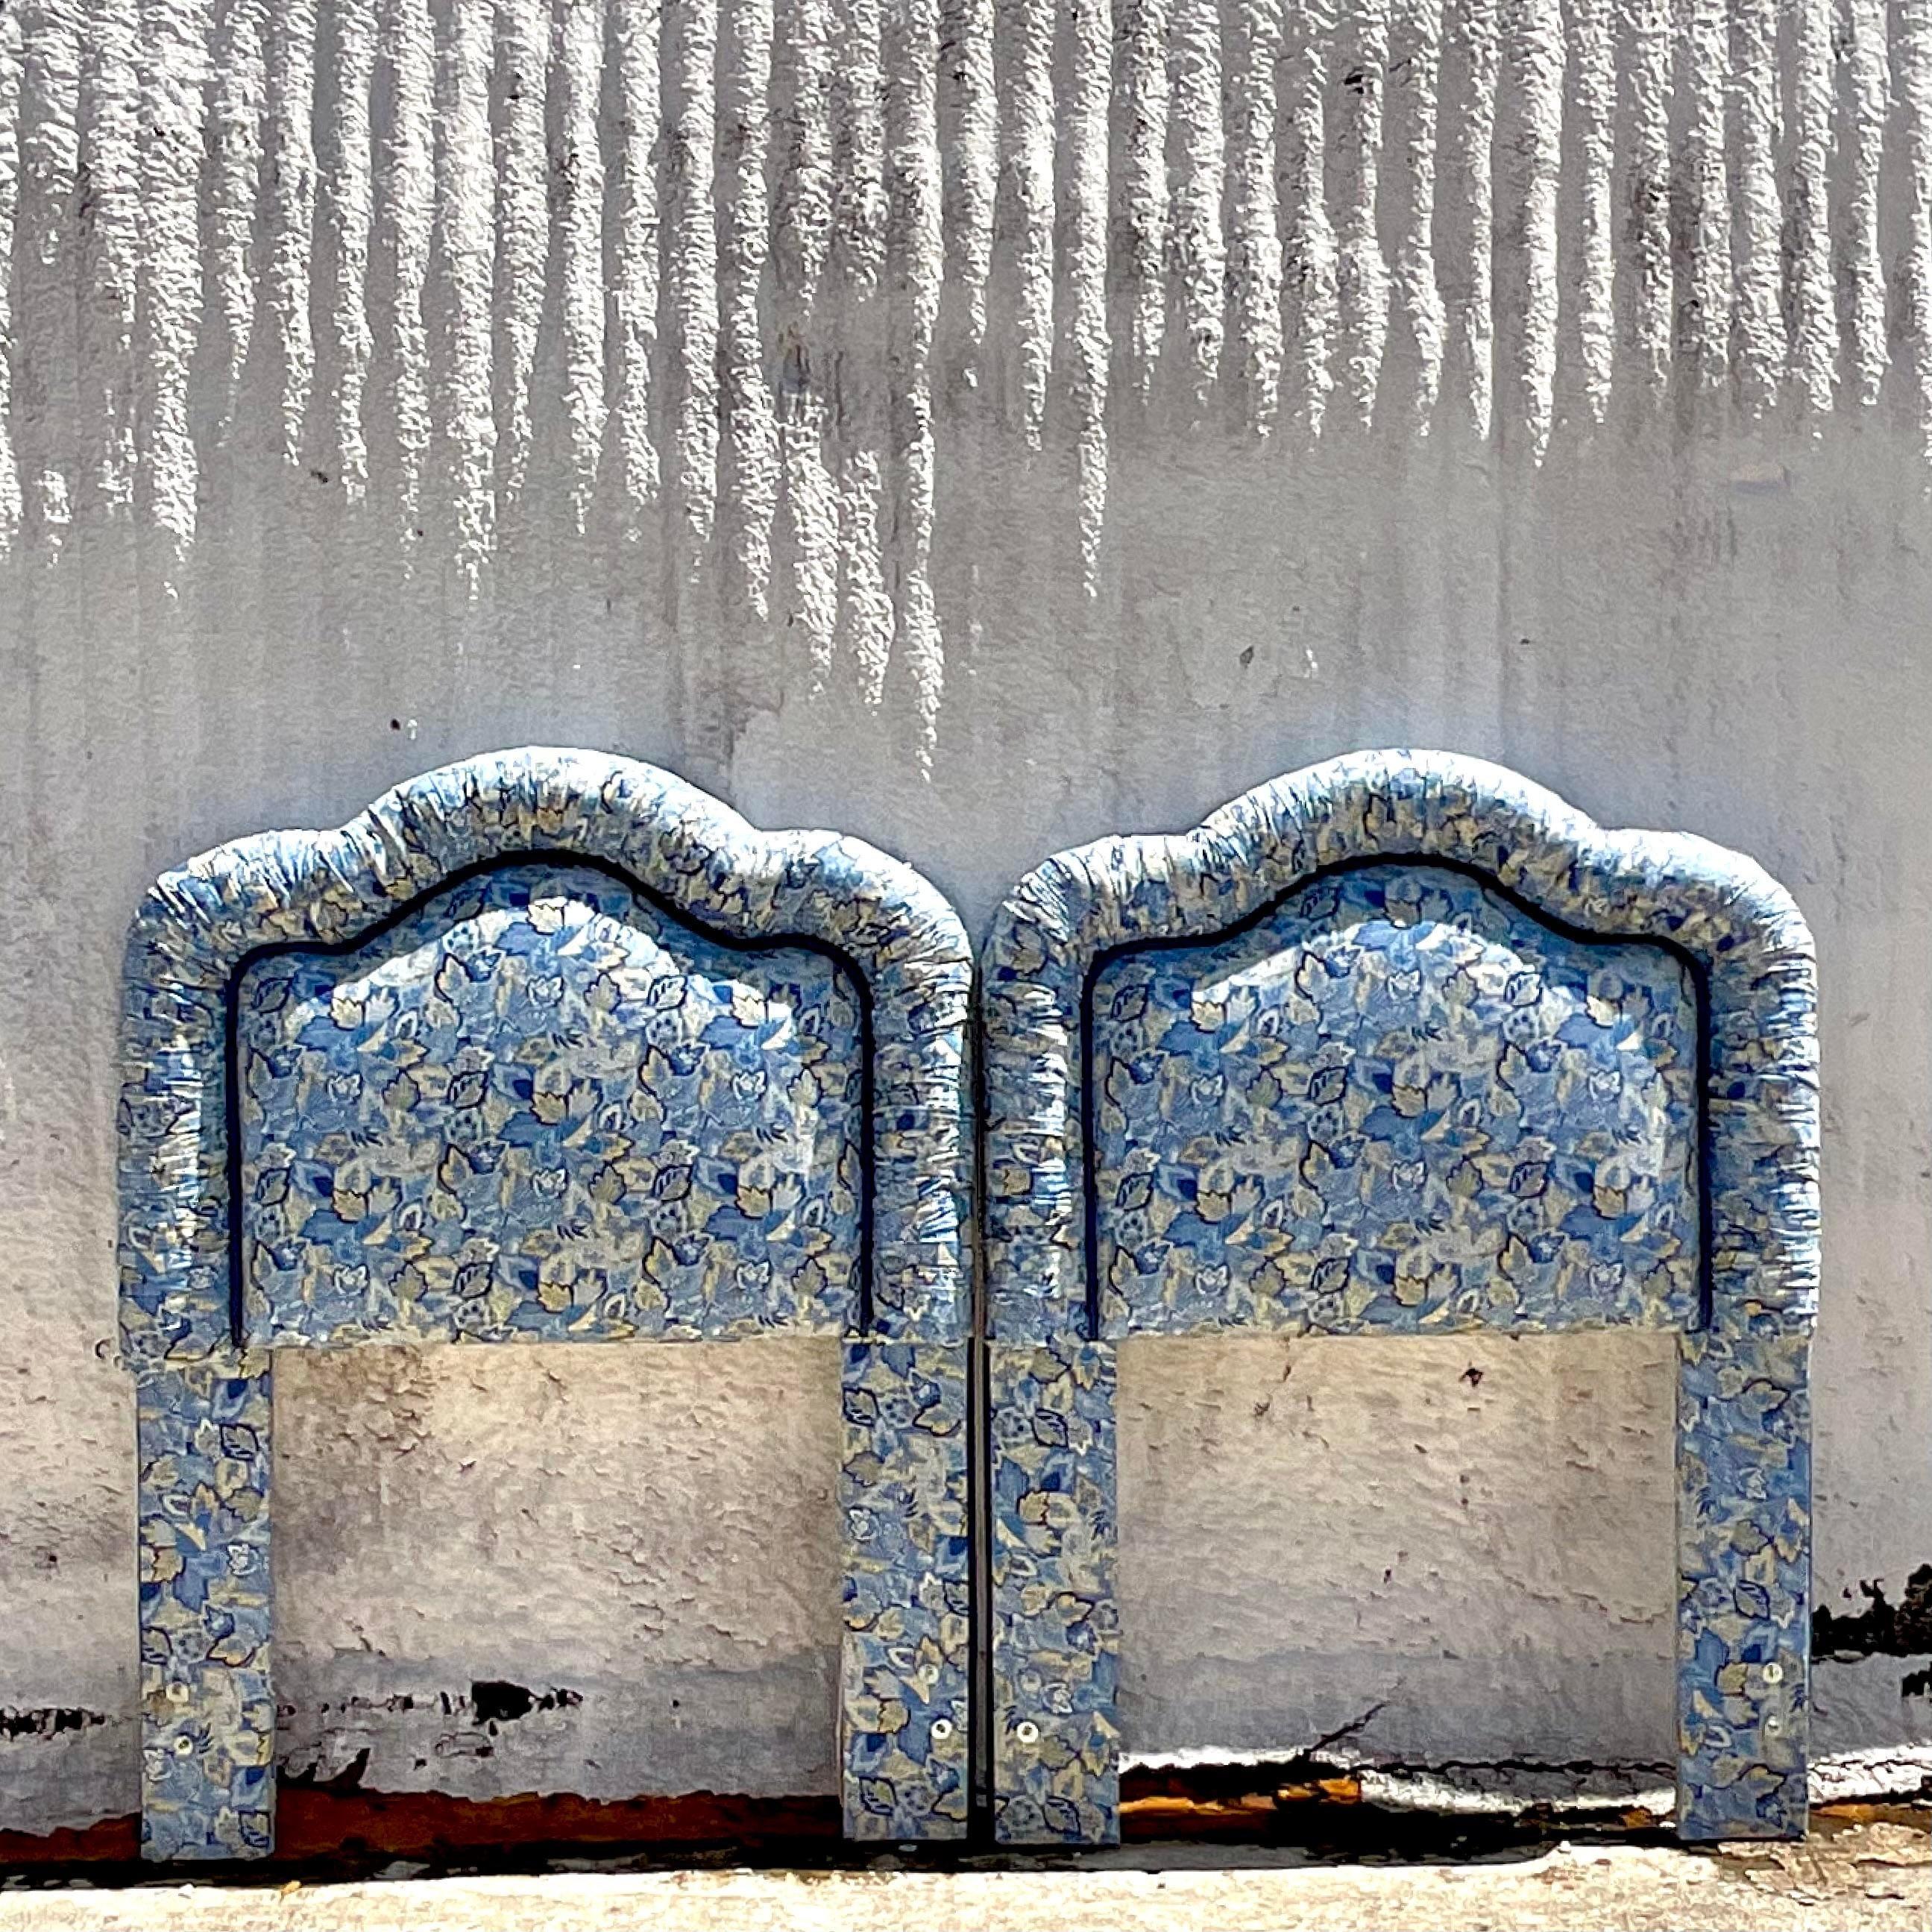 Wood Late 20th Century Vintage Boho Paisley Upholstered Twin Headboards - a Pair For Sale